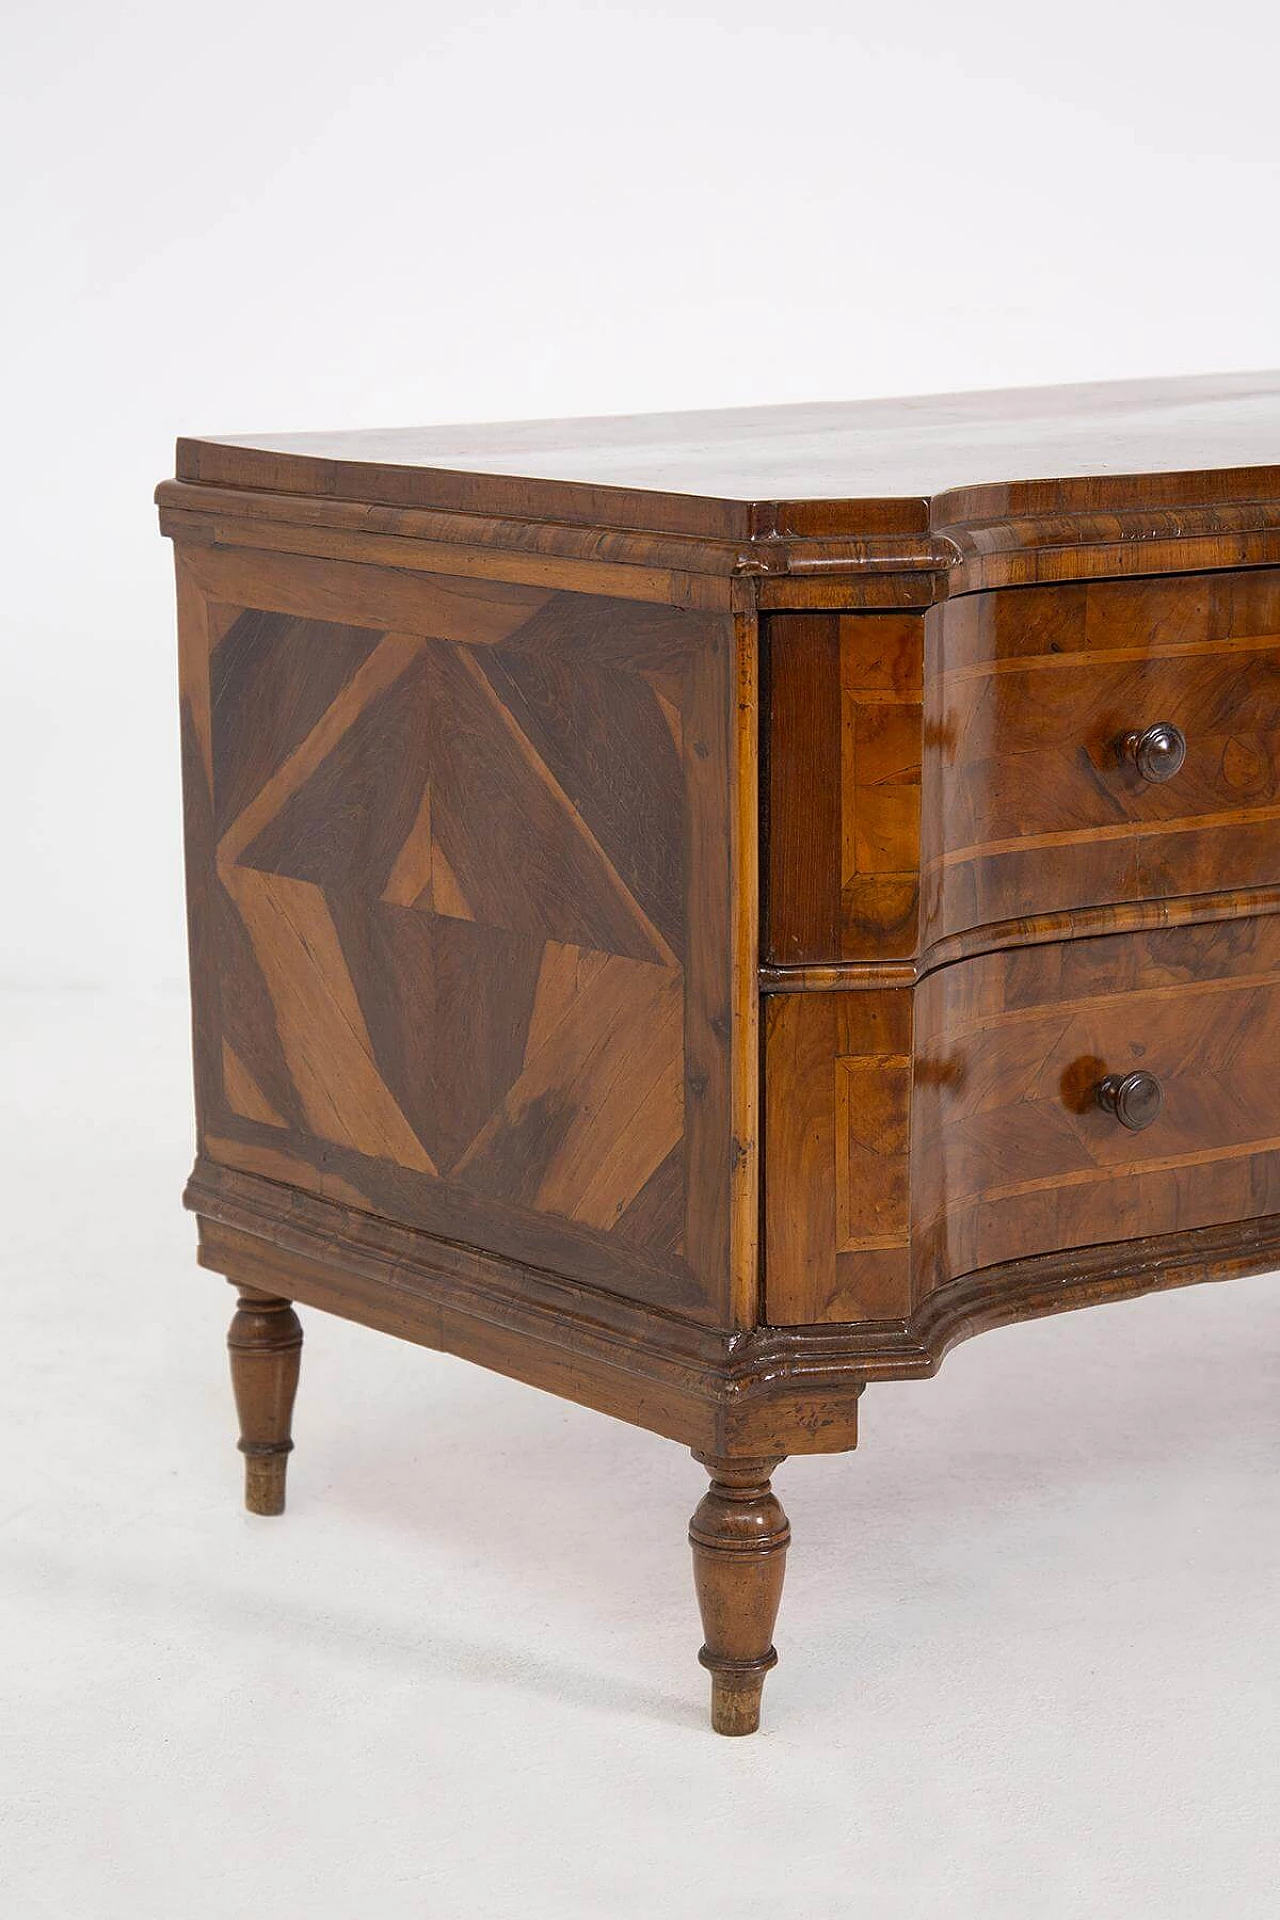 Walnut-root chest of drawers with inlaid decoration, 18th century 1408634